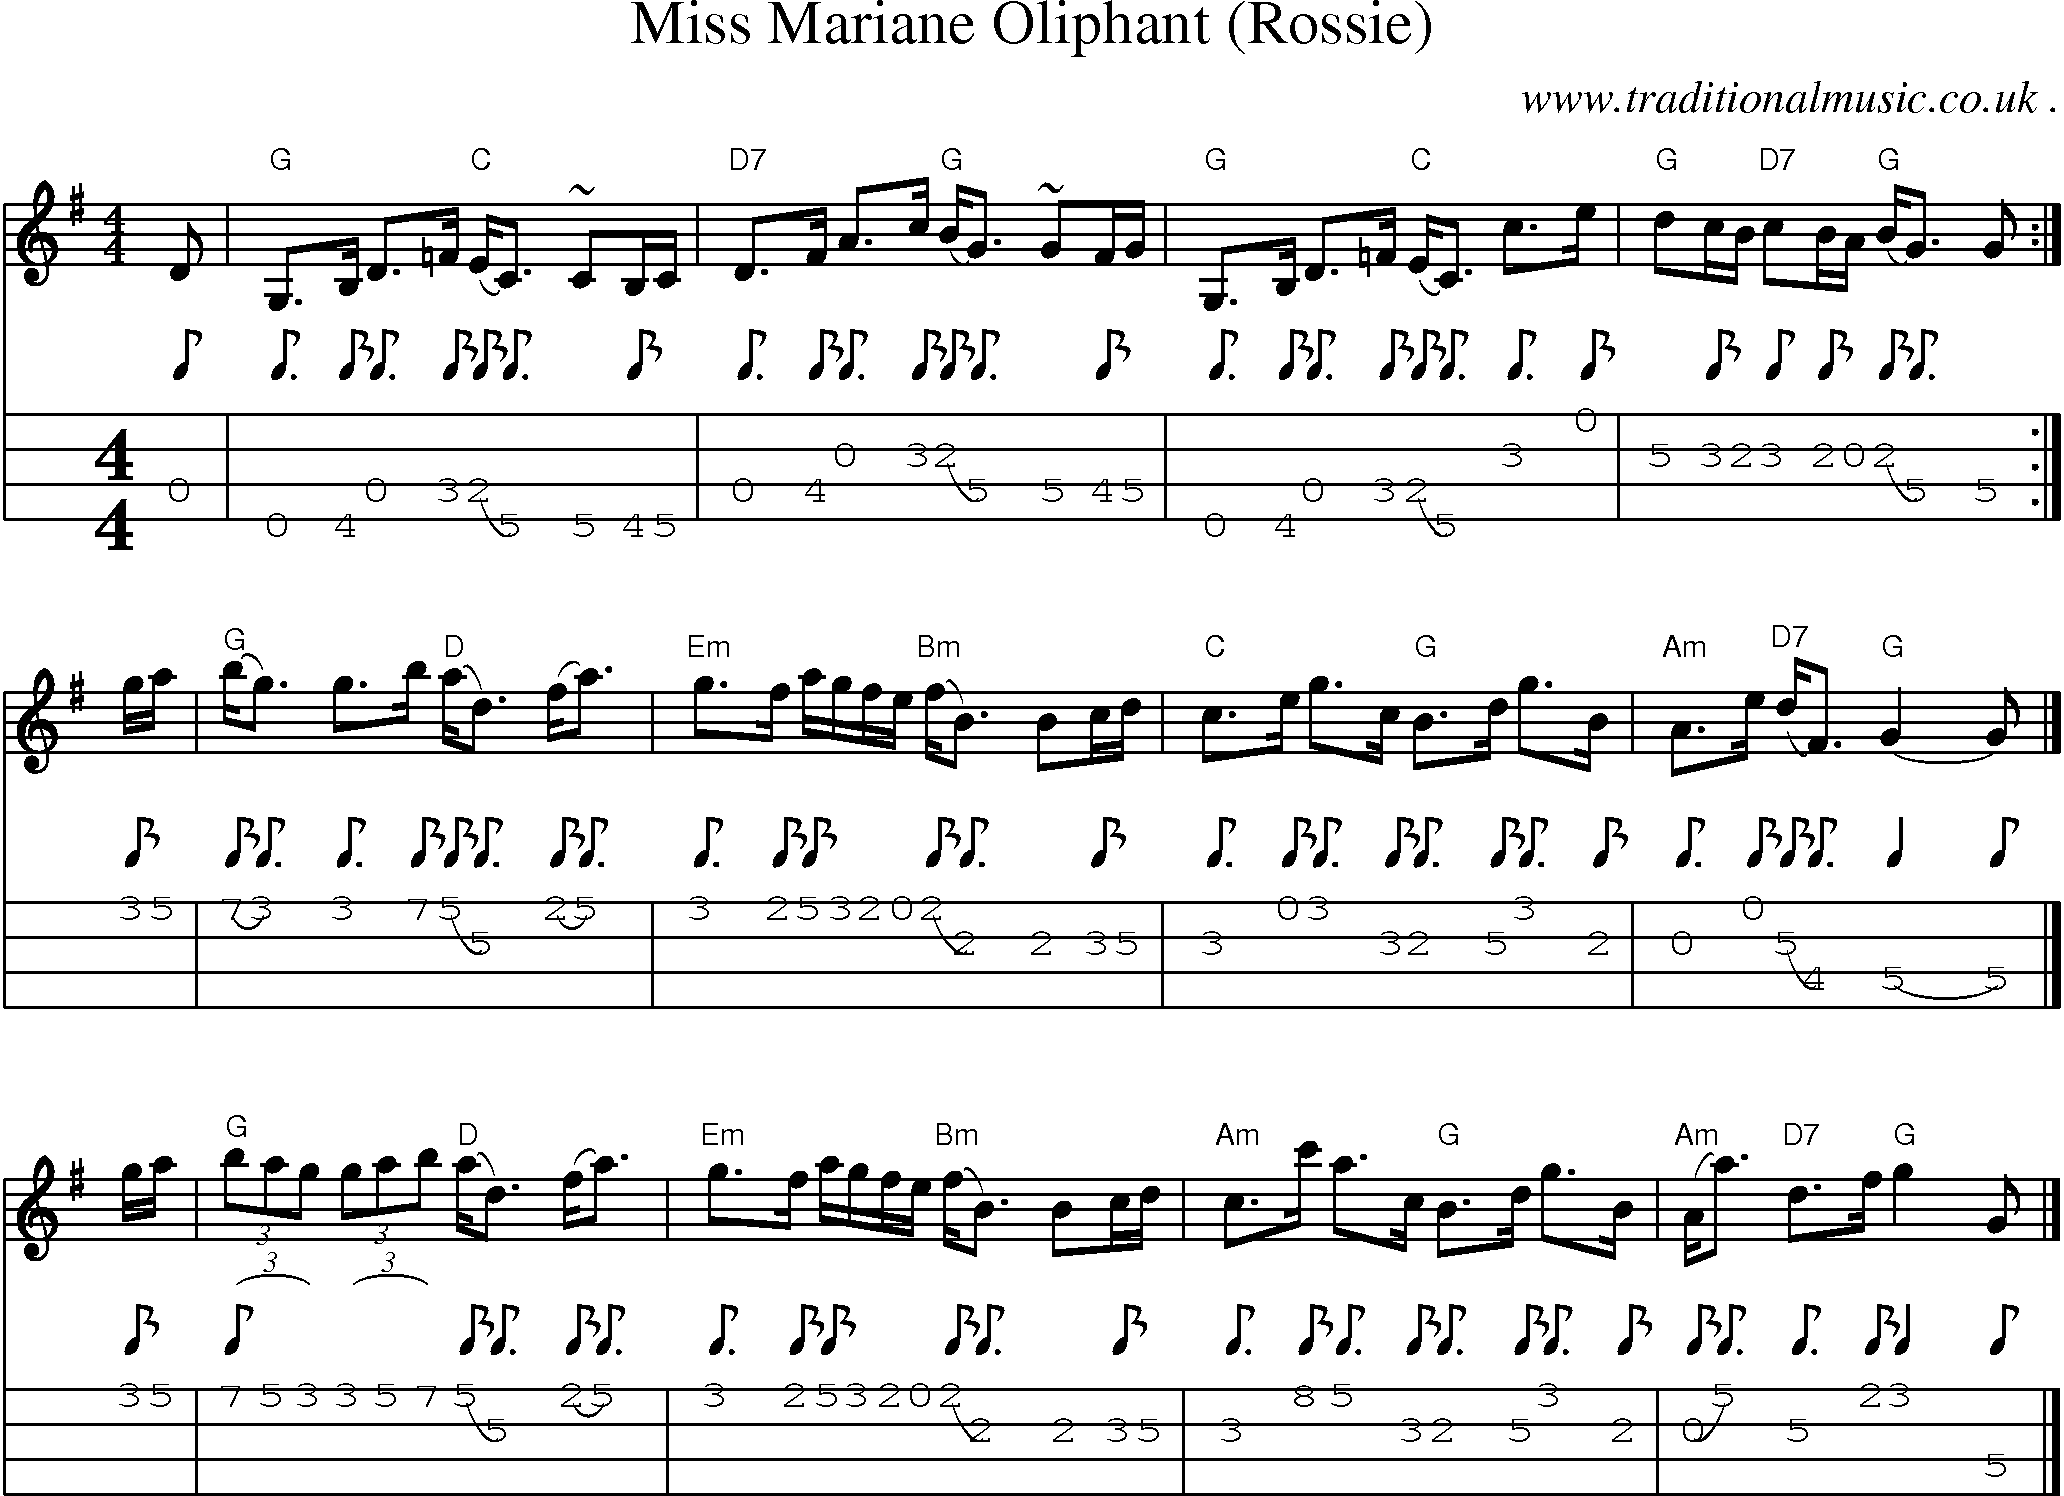 Sheet-music  score, Chords and Mandolin Tabs for Miss Mariane Oliphant Rossie